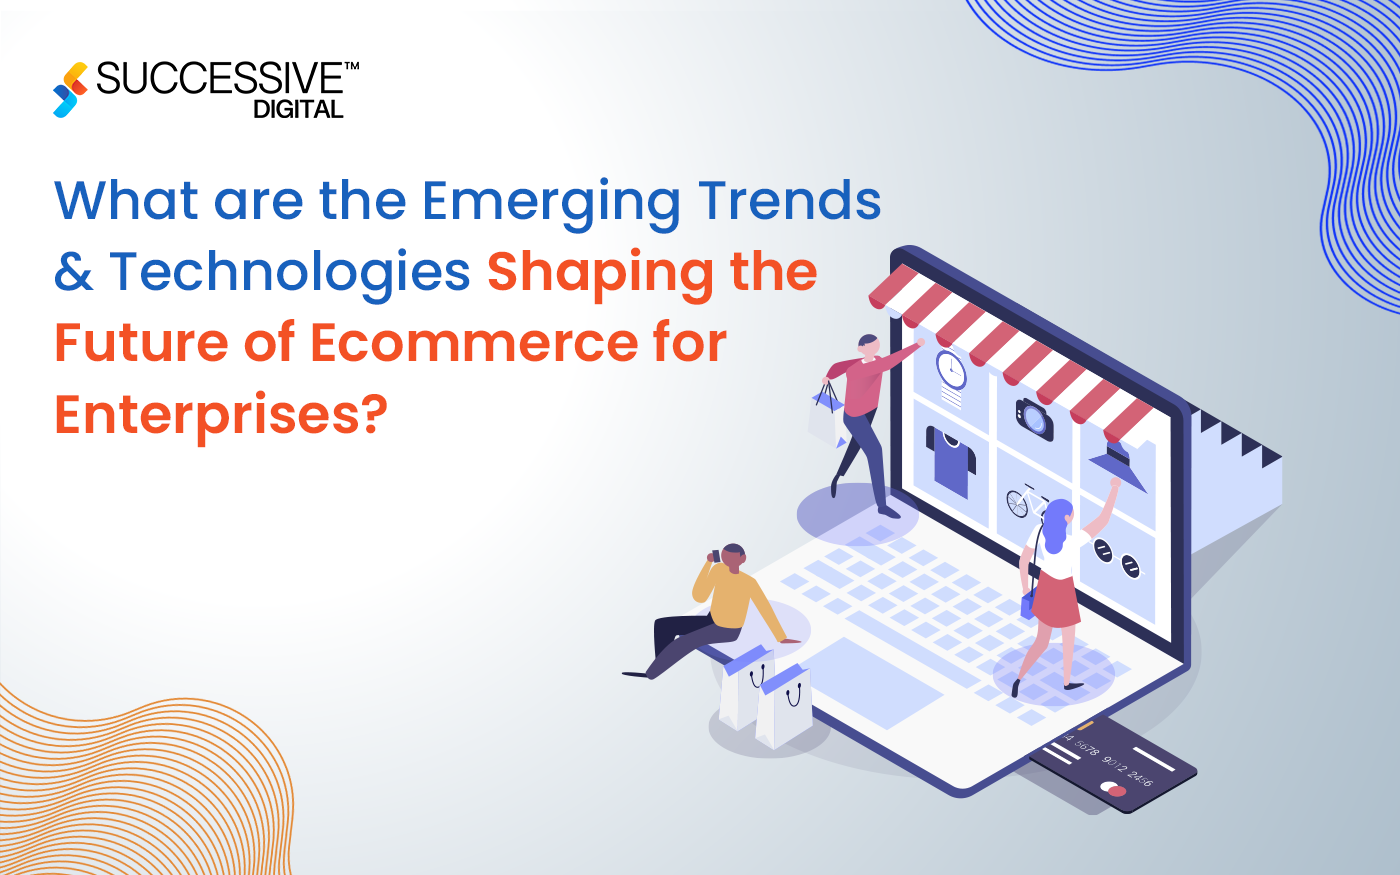 What are the Emerging Trends and Technologies Shaping the Future of Ecommerce for Enterprises?